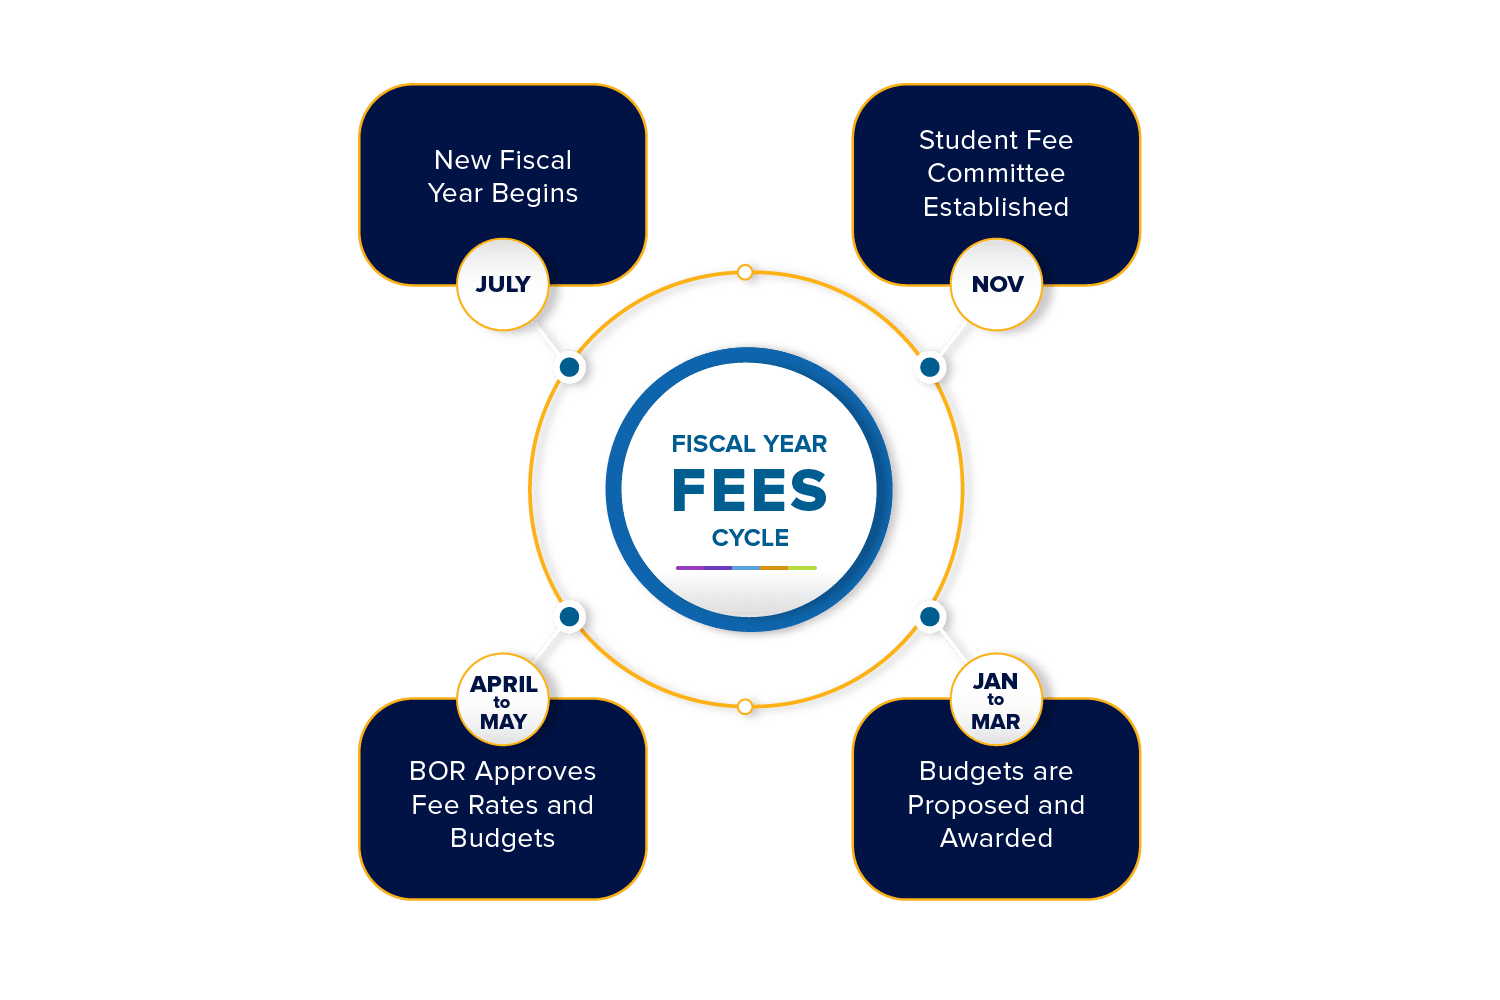 Fiscal Year Fees Cycle